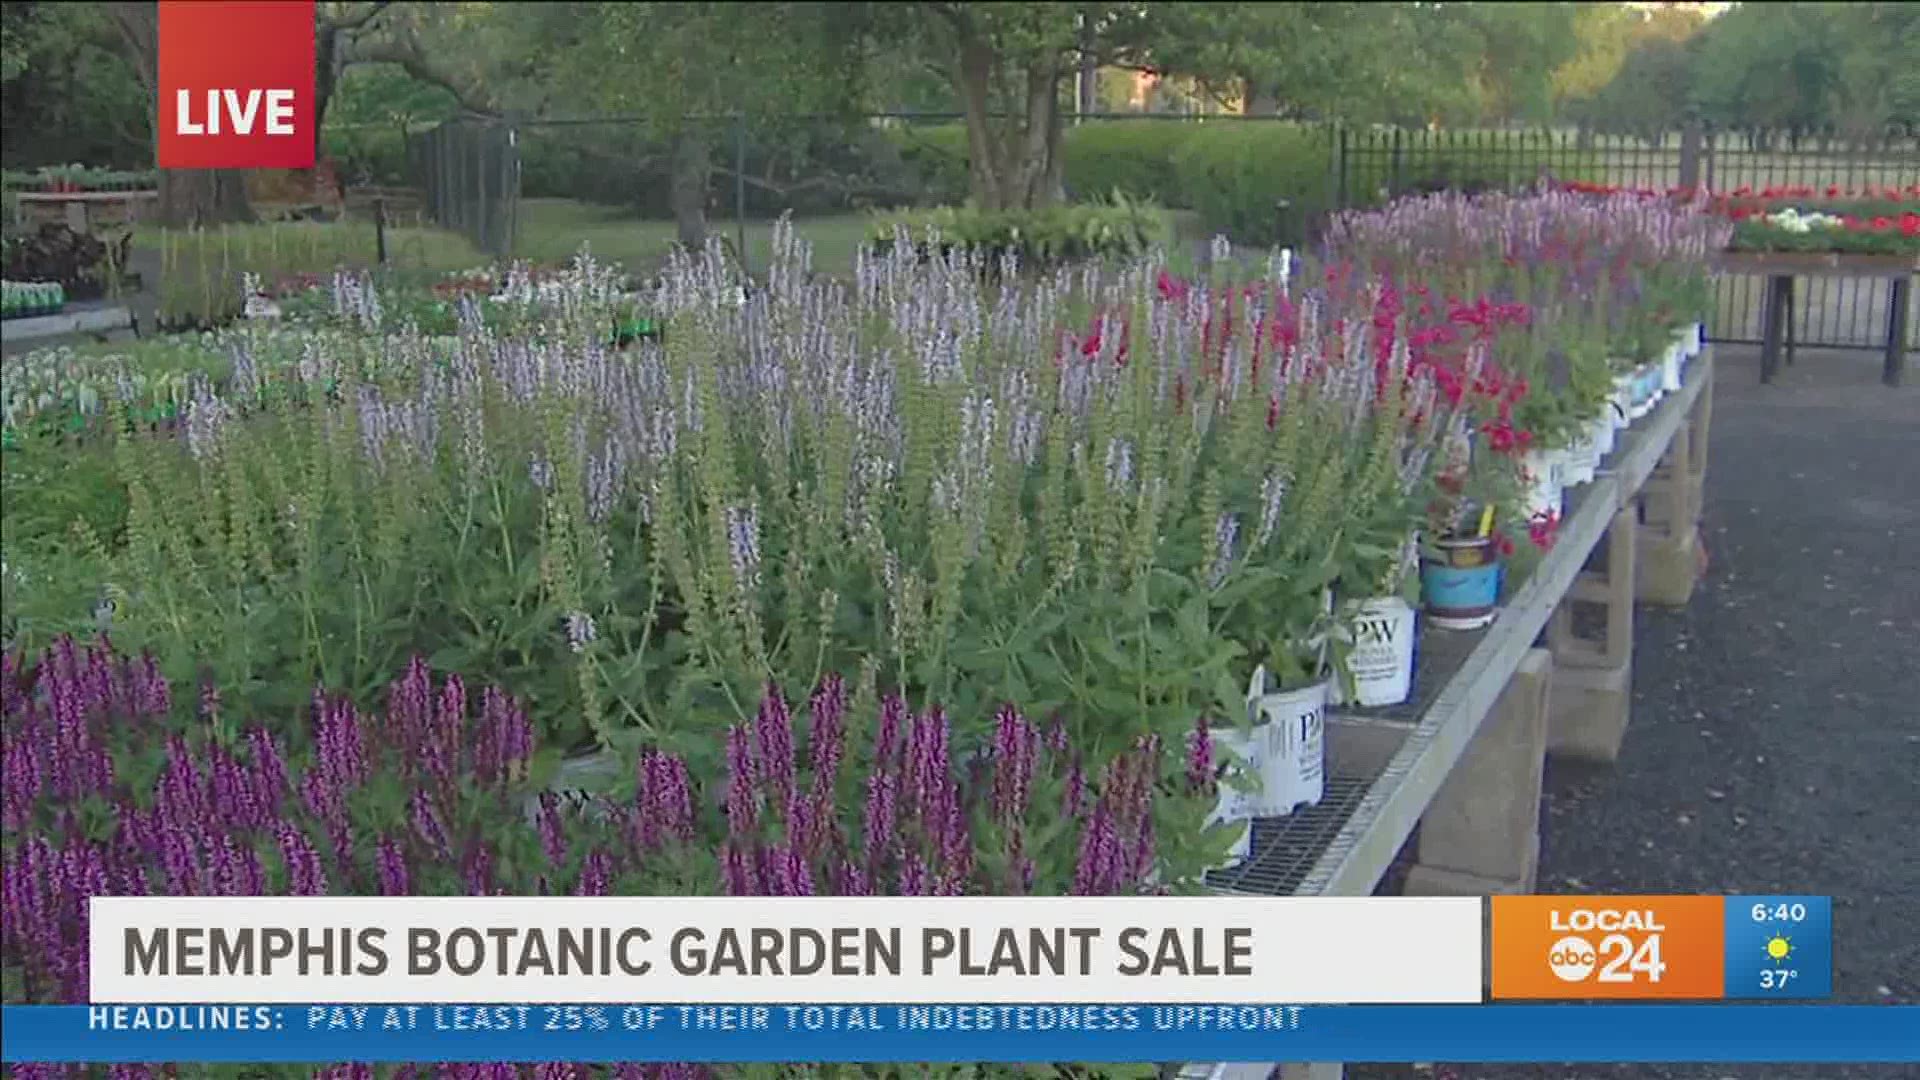 Memphis Botanic Garden had to look far and wide to fill this year's sale due to the growing interest in gardening